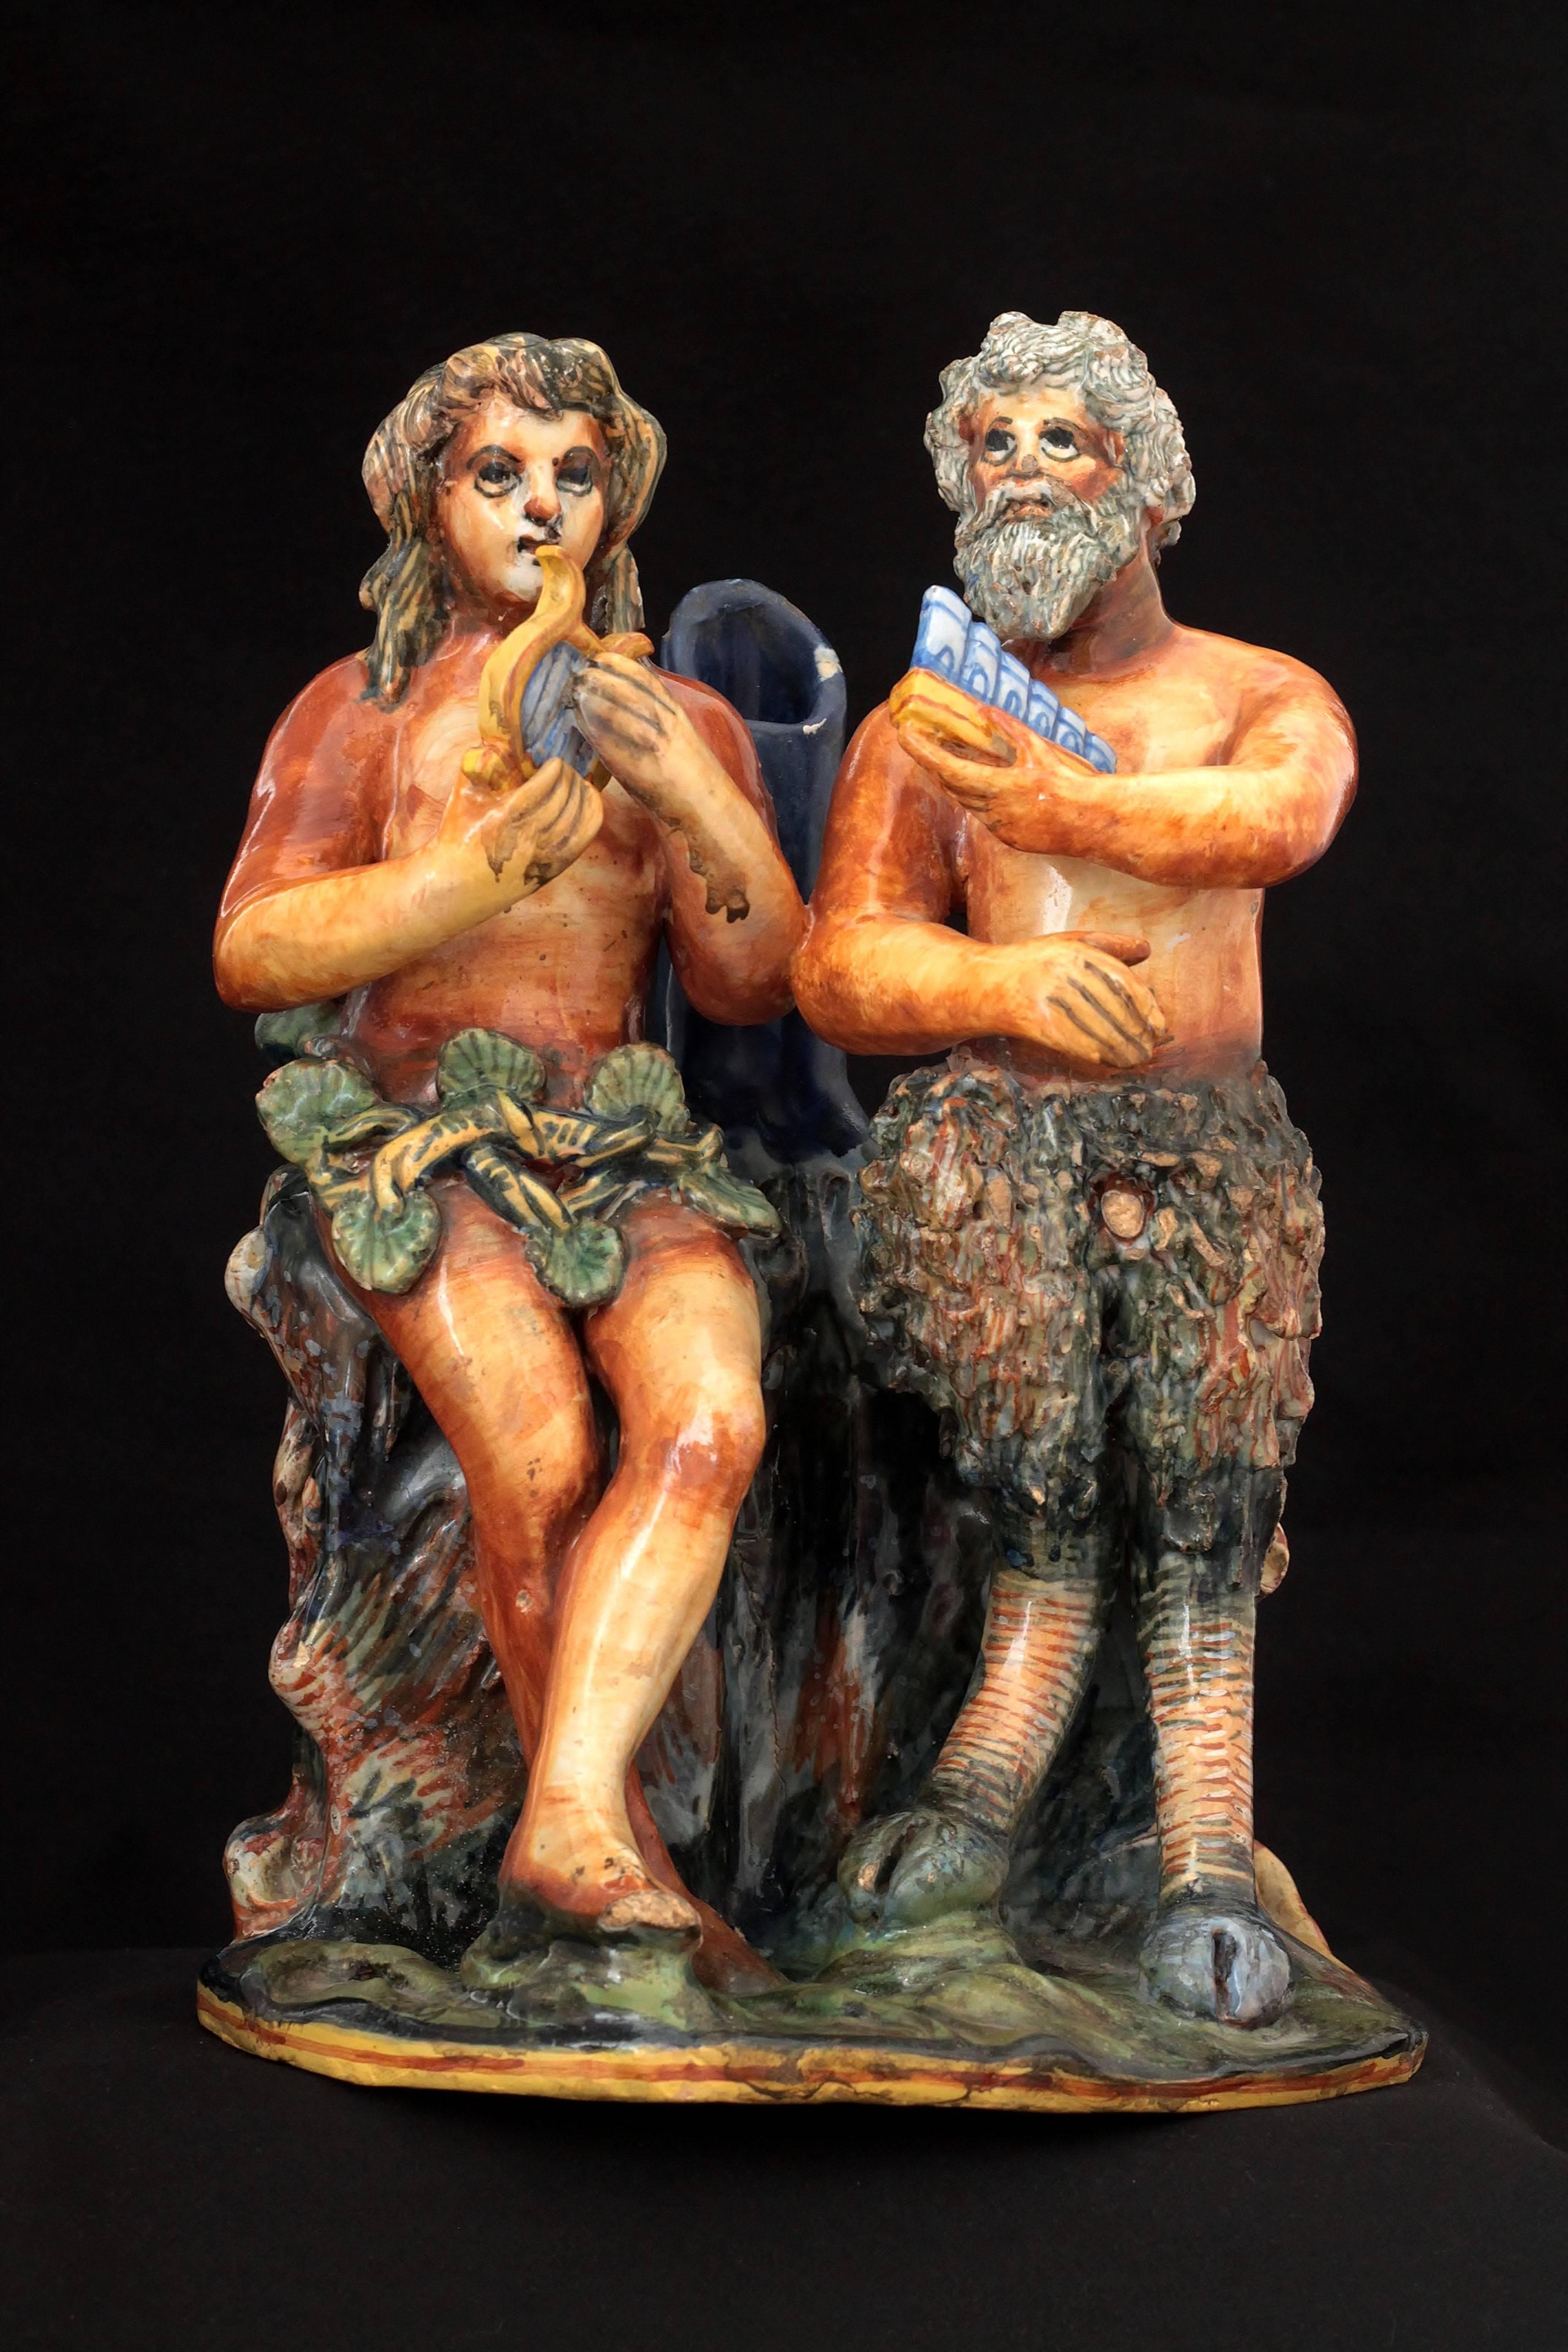 Originally modelled as a woman and a faun or a satyr playing lyre and pan pipe with naturals colors. End of 16th century.
Measures: Height 27.5 cm, width 19.5 cm, depth 15 cm
Some chips and lacks of enamel restored, base restuck, right hand of